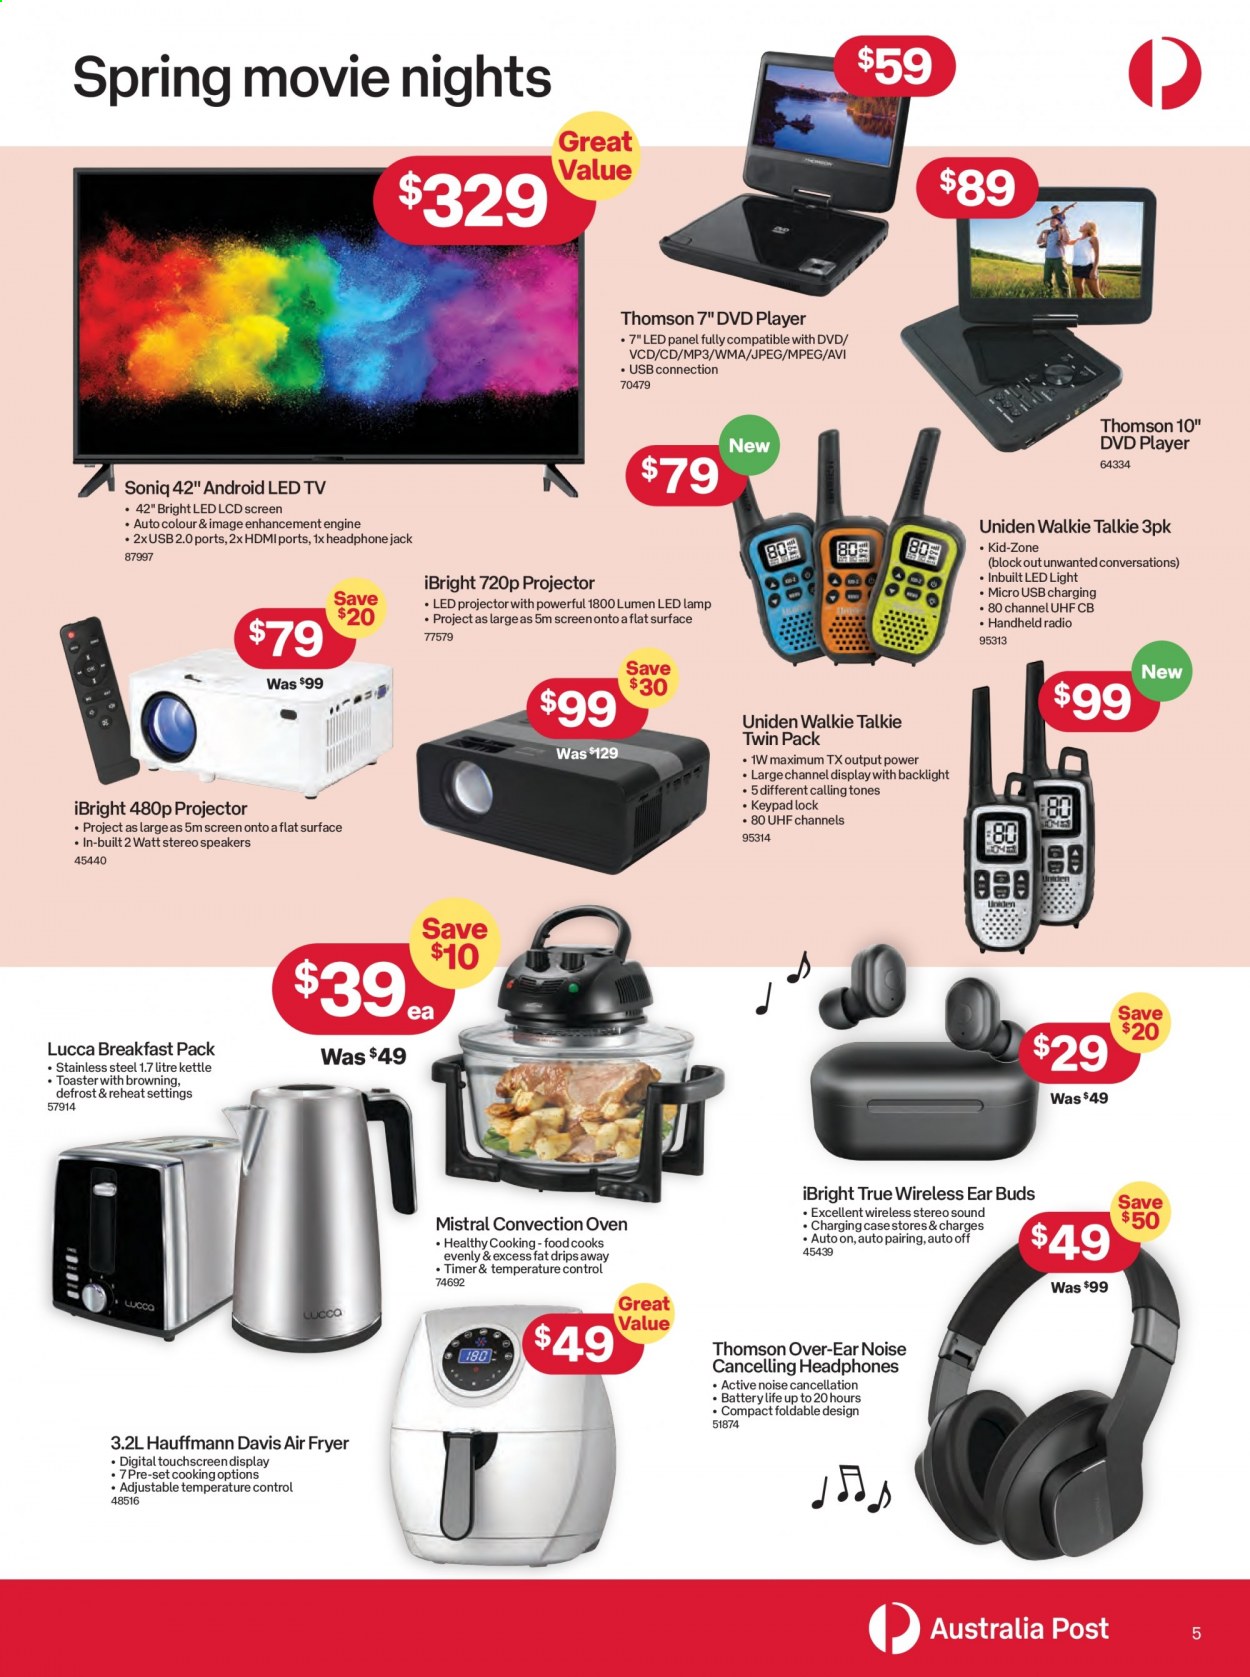 thumbnail - Australia Post Catalogue - 6 Sep 2021 - 3 Oct 2021 - Sales products - breakfast pack, Uniden, handheld radio, Thomson, LED TV, TV, radio, dvd player, projector, speaker, headphones, oven, convection oven, air fryer, toaster, kettle, lamp, LED light. Page 5.